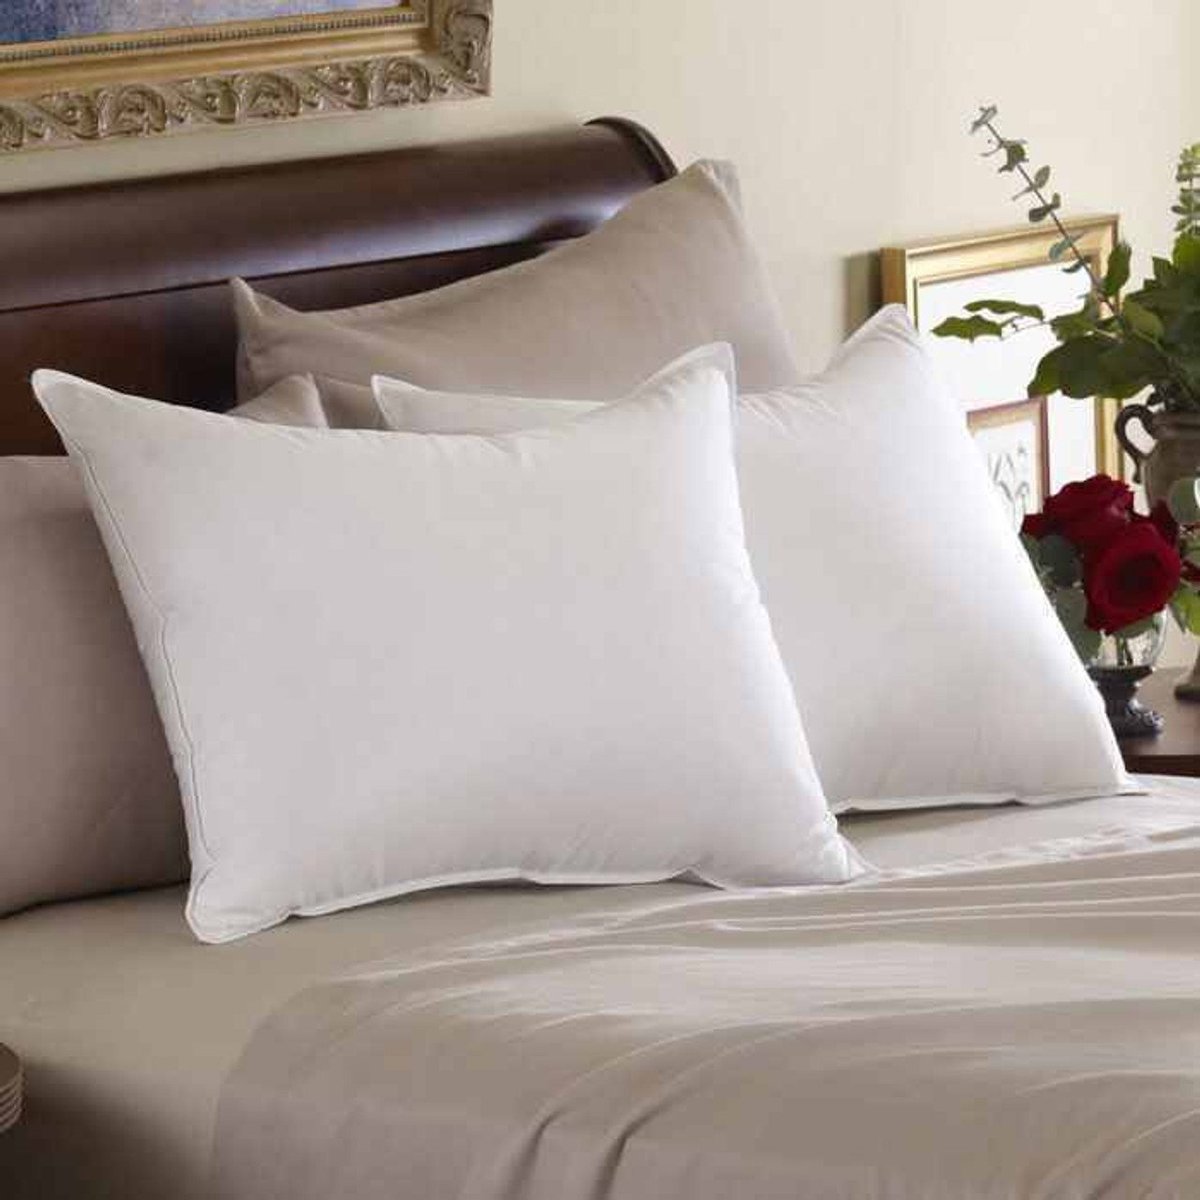 We provide you with a massive collection of Pacific Coast Pillows that is durable and extra comfy. Even after multiple washes, our pillow's colors don't fade, and it has wrinkle-free properties. Visit here for more information hotels4humanity.com/pacific-coast-… #comfypillows #coastpillows